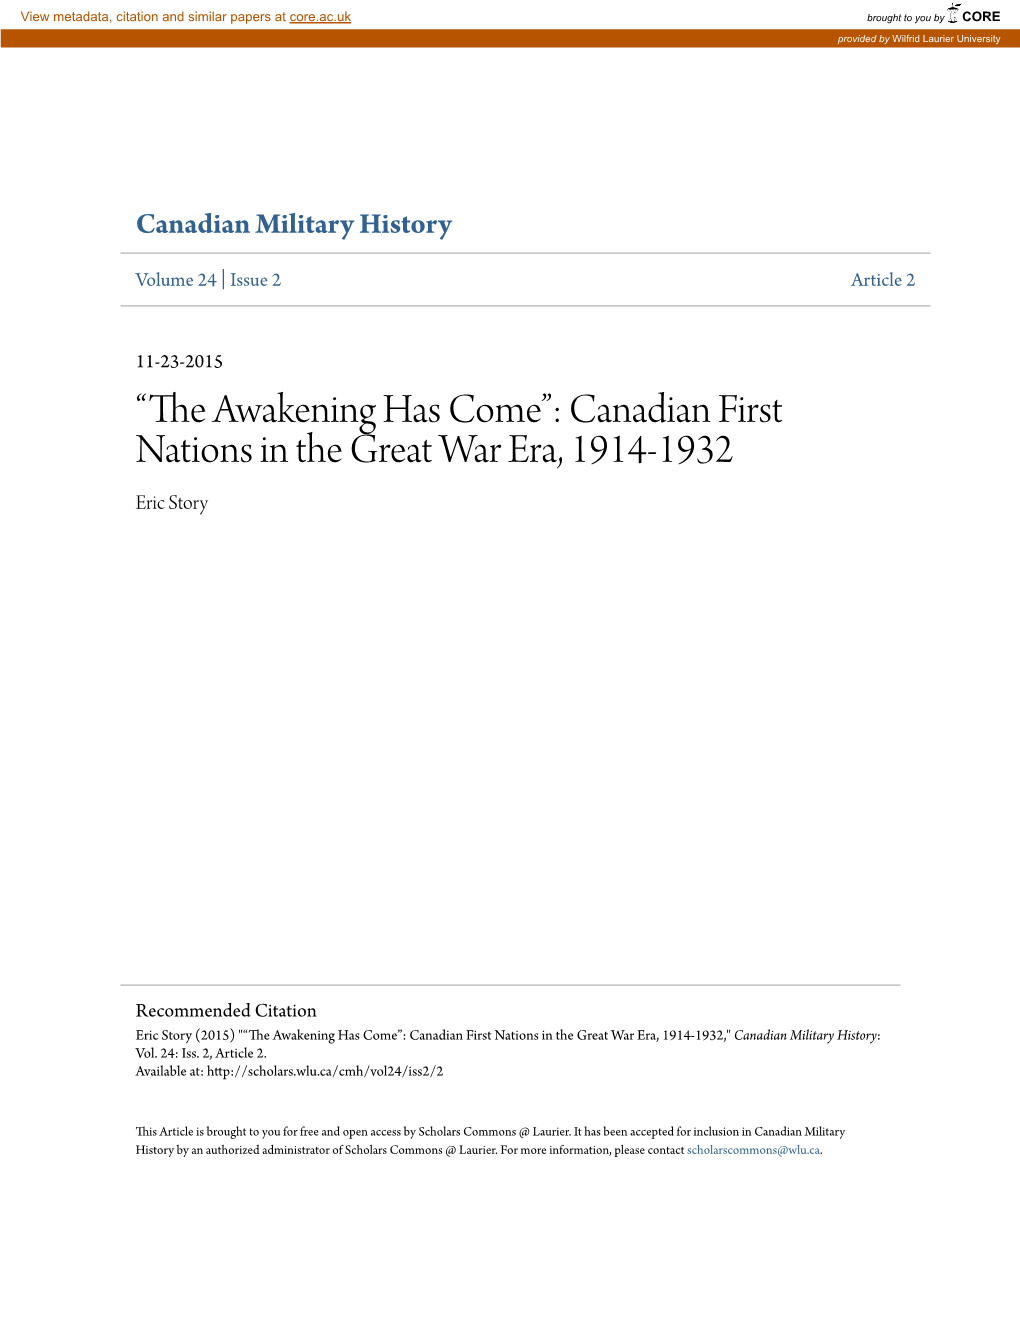 Canadian First Nations in the Great War Era, 1914-1932 Eric Story